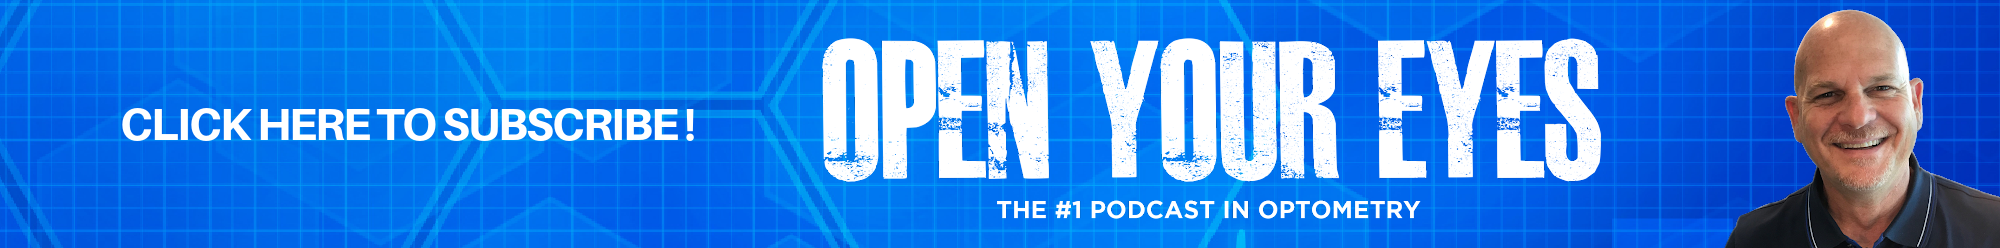 OPEN YOUR EYES PODCAST IN OPTOMETRY (1)